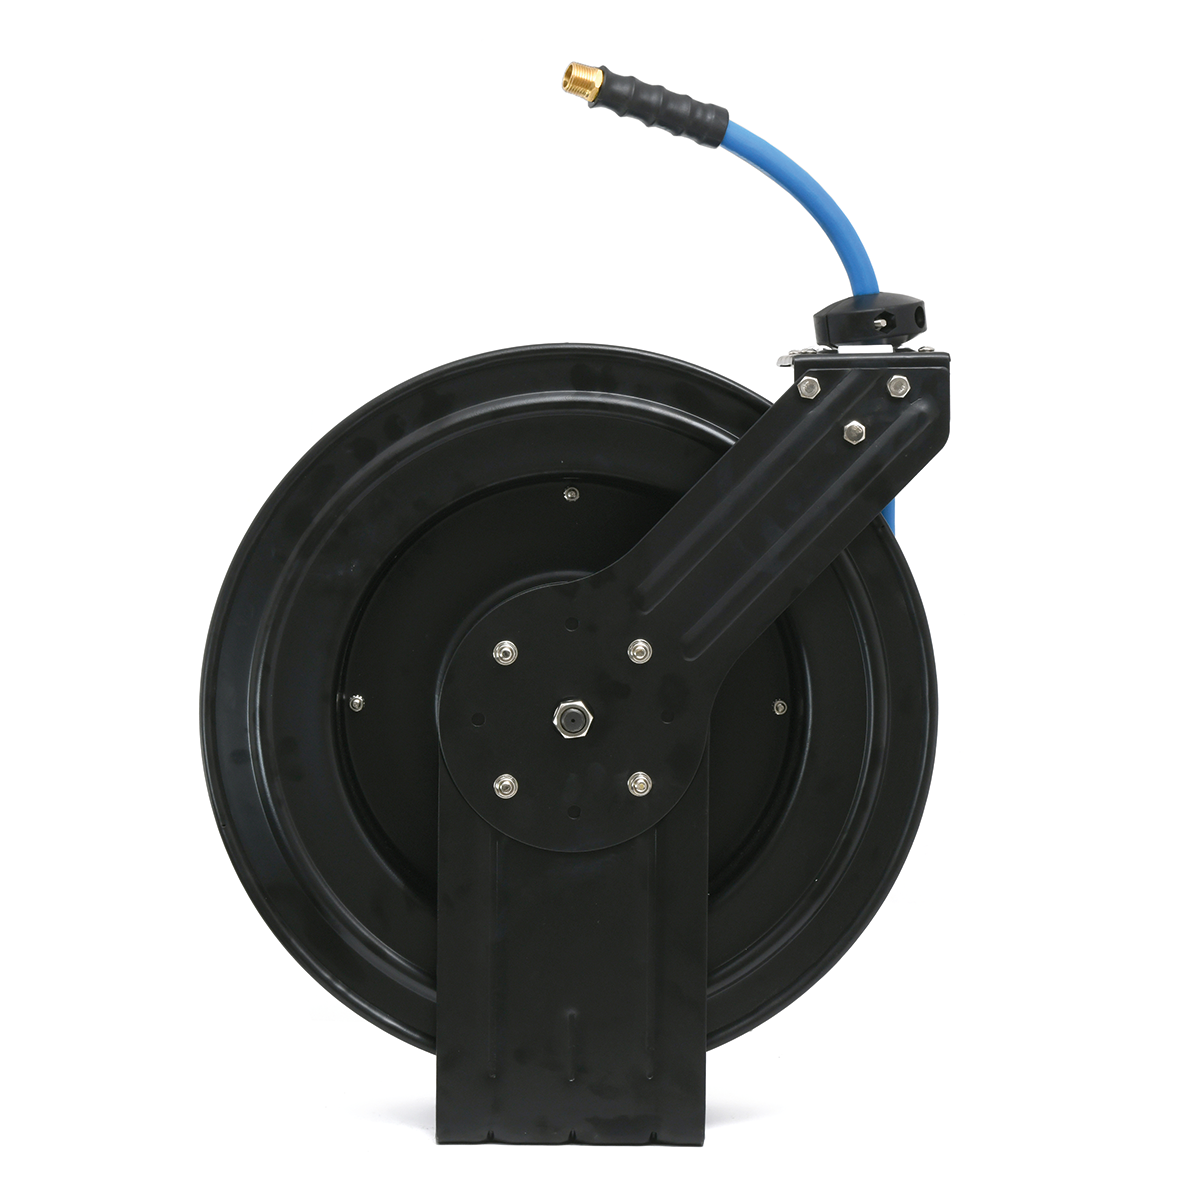 BluBird Air Hose Reel 3/8 Retractable Steel Construction with Rubber Hose  300 PSI